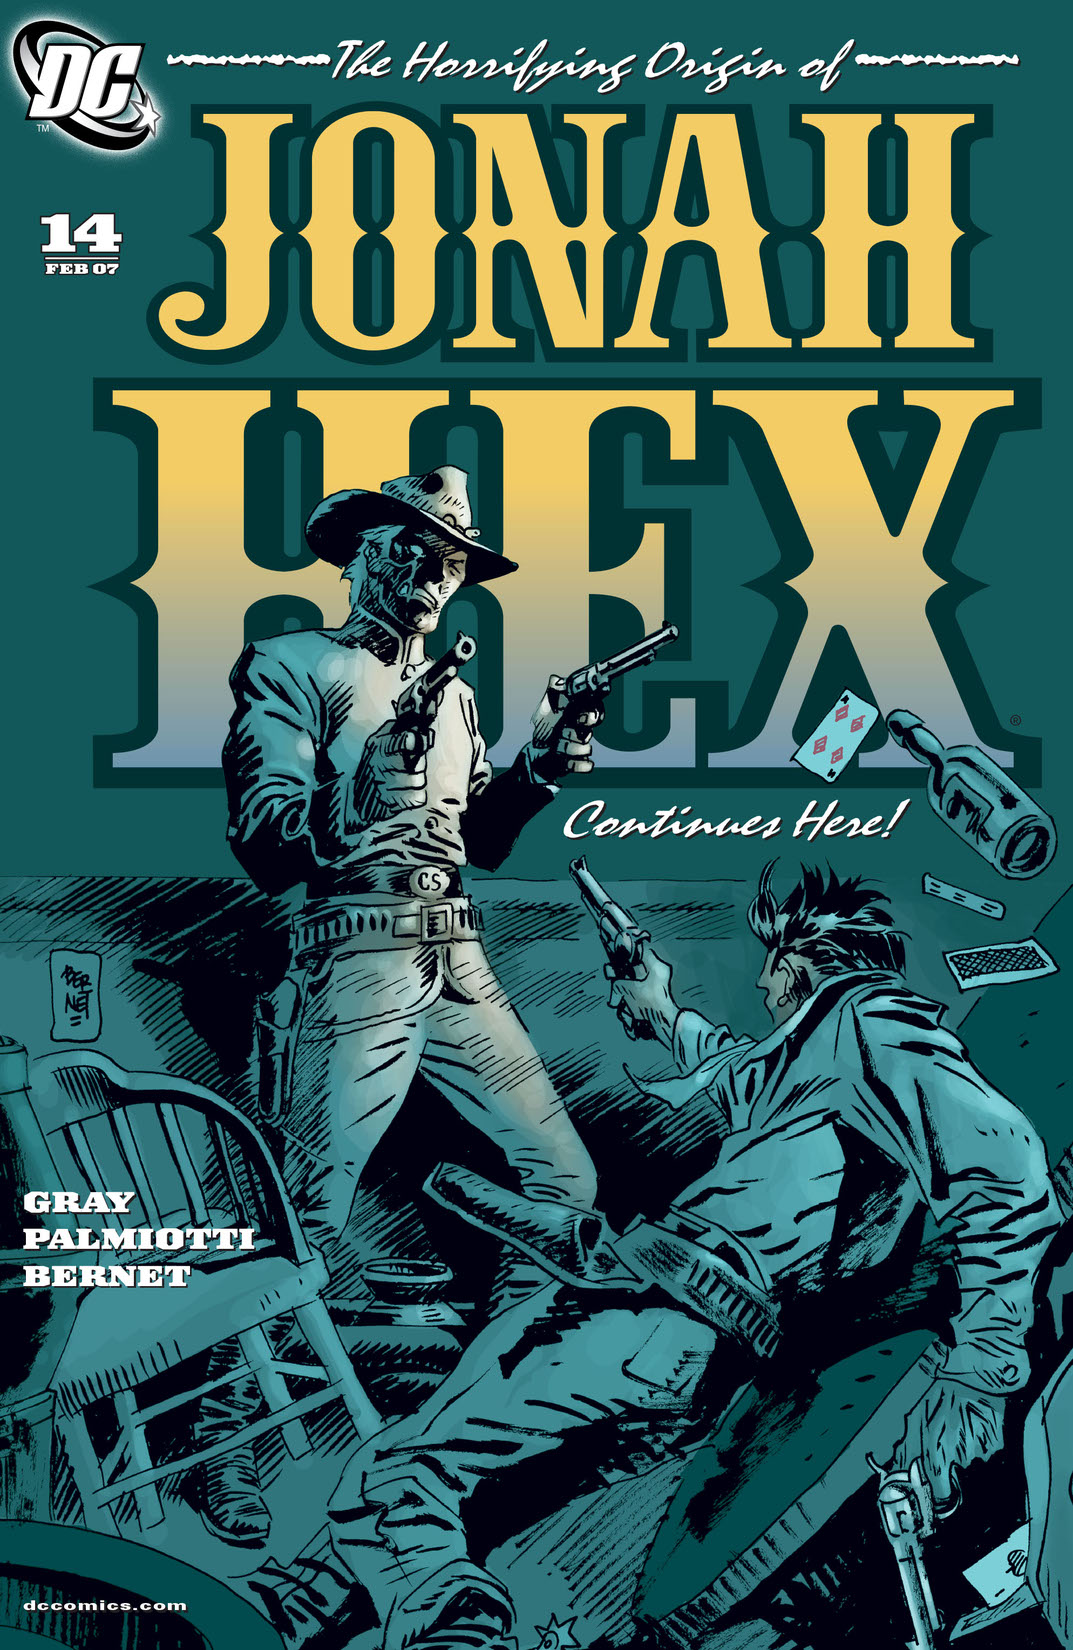 Jonah Hex #14 preview images